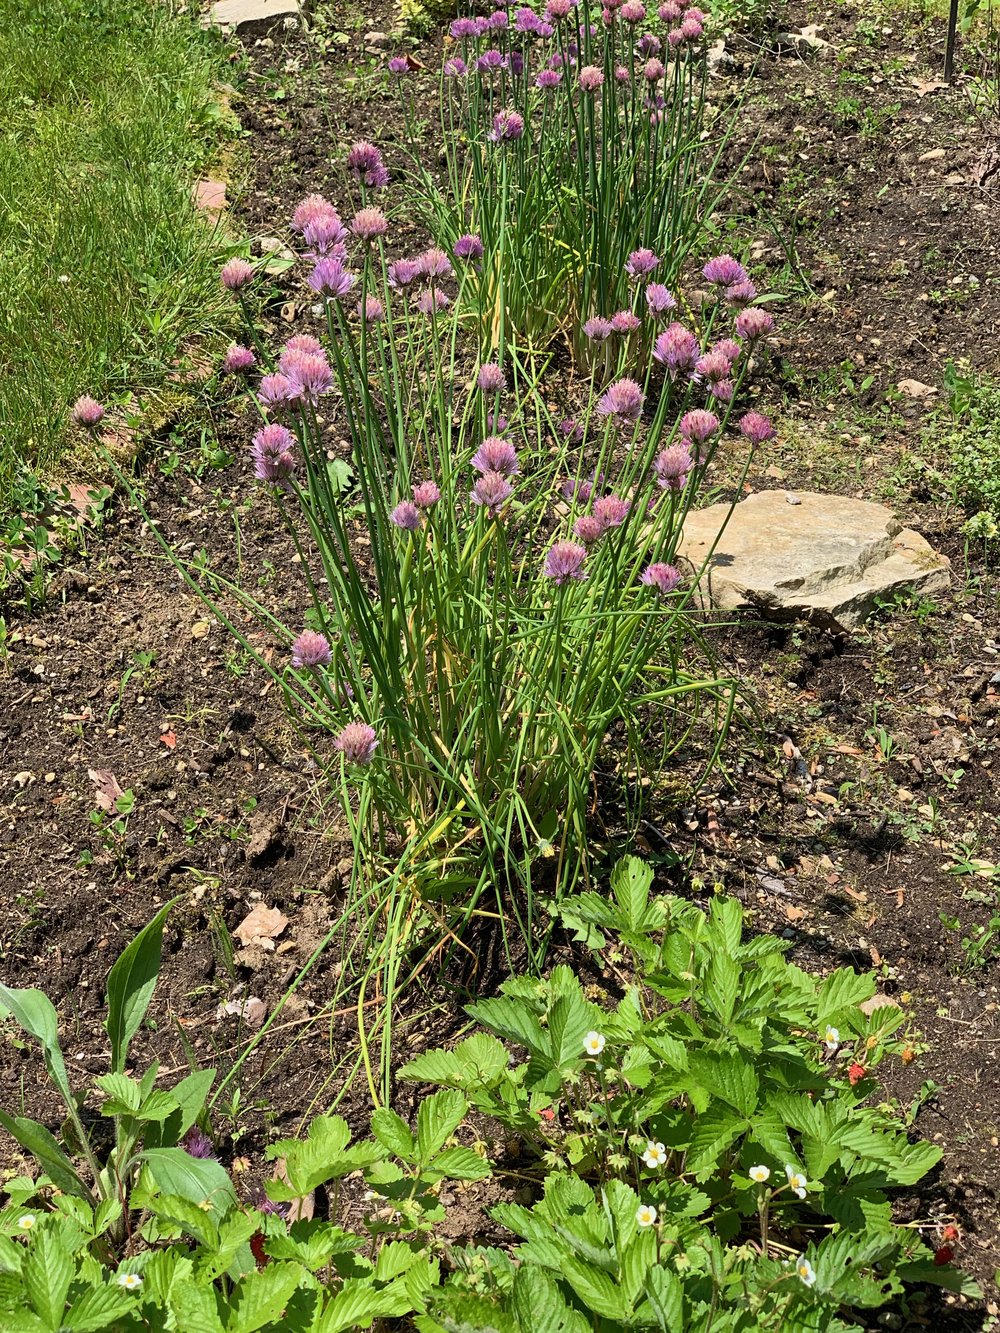 My sparse herb garden is calling for basil, parsley, cilantro and maybe some marigolds to keep the bugs away.  But please enjoy the chive, thyme, sage and oregano.